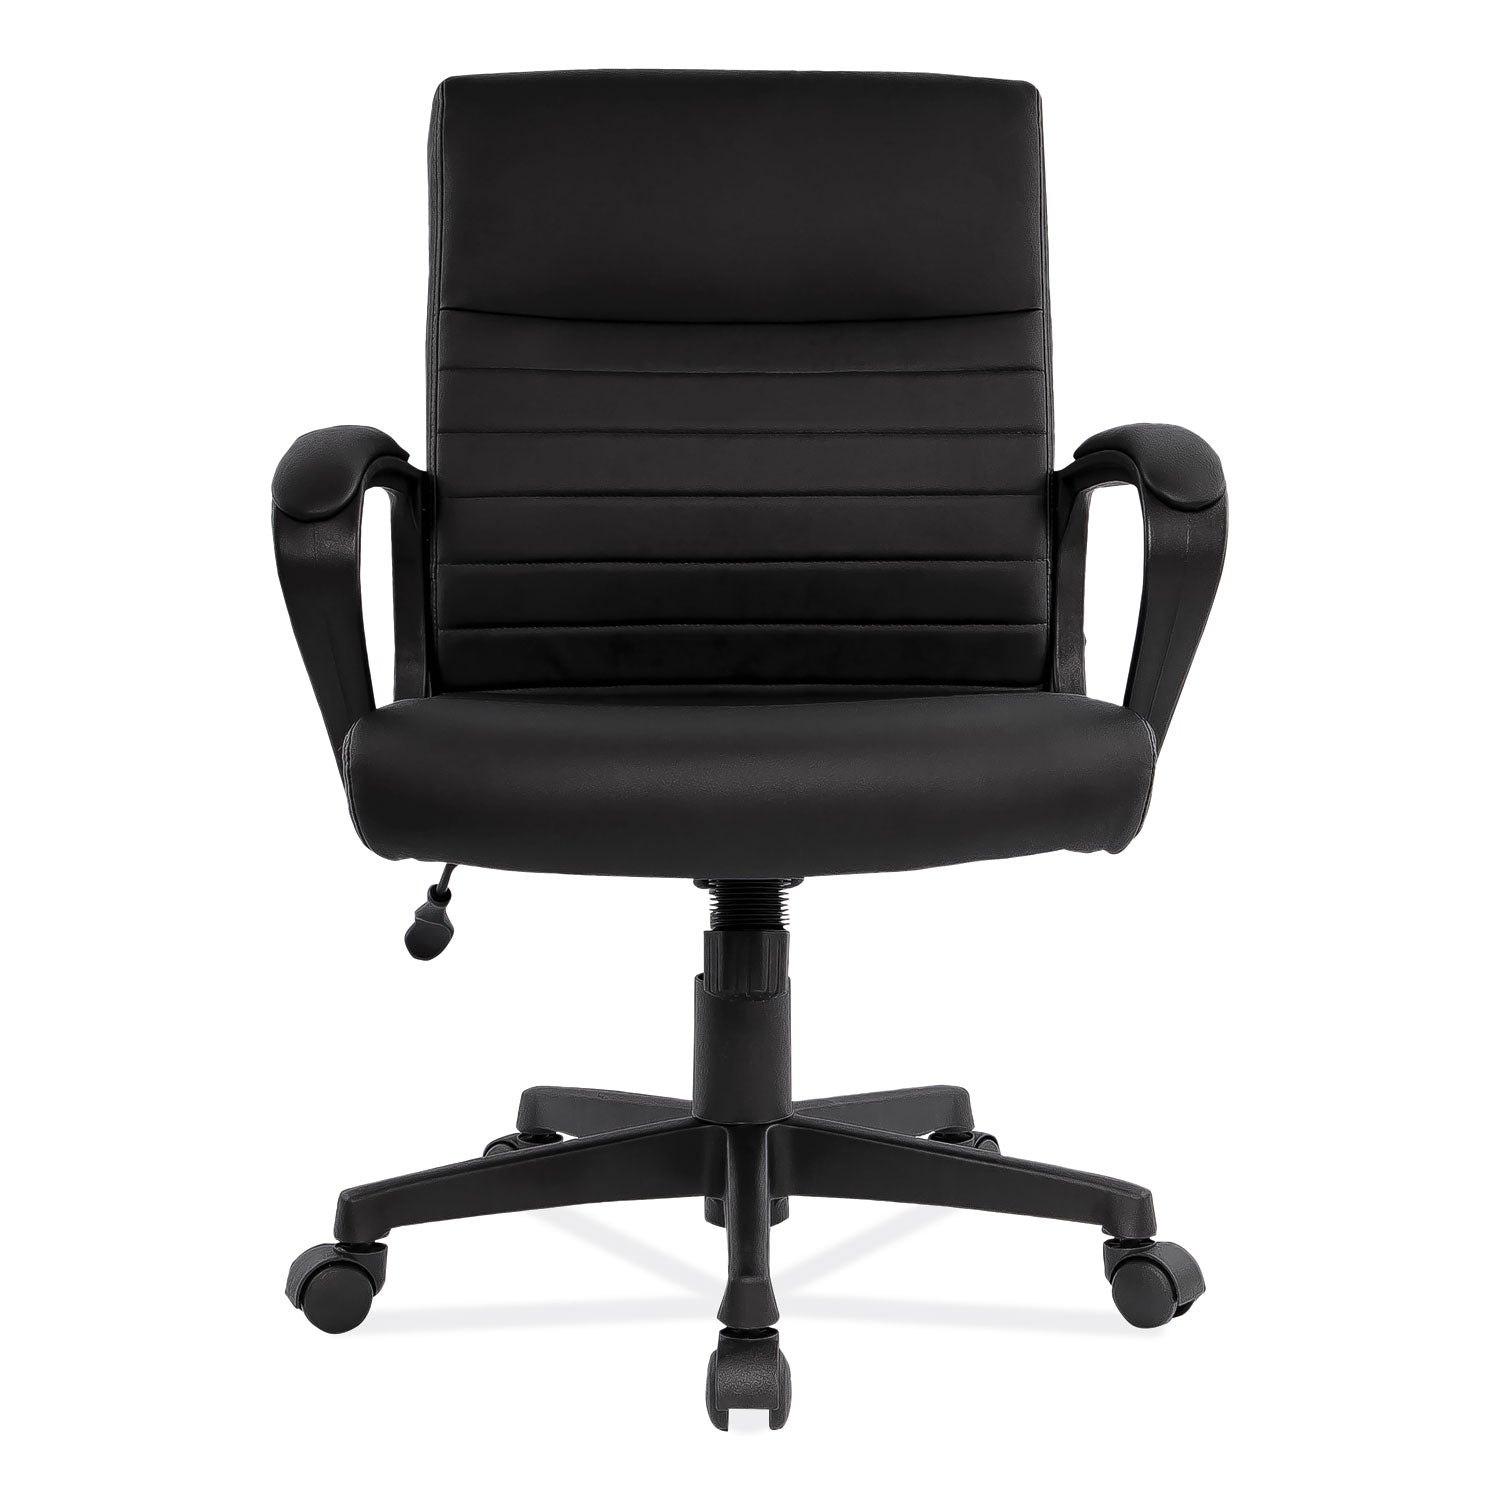 Alera Breich Series Manager Chair, Supports Up to 275 lbs, 16.73" to 20.39" Seat Height, Black Seat/Back, Black Base - 5